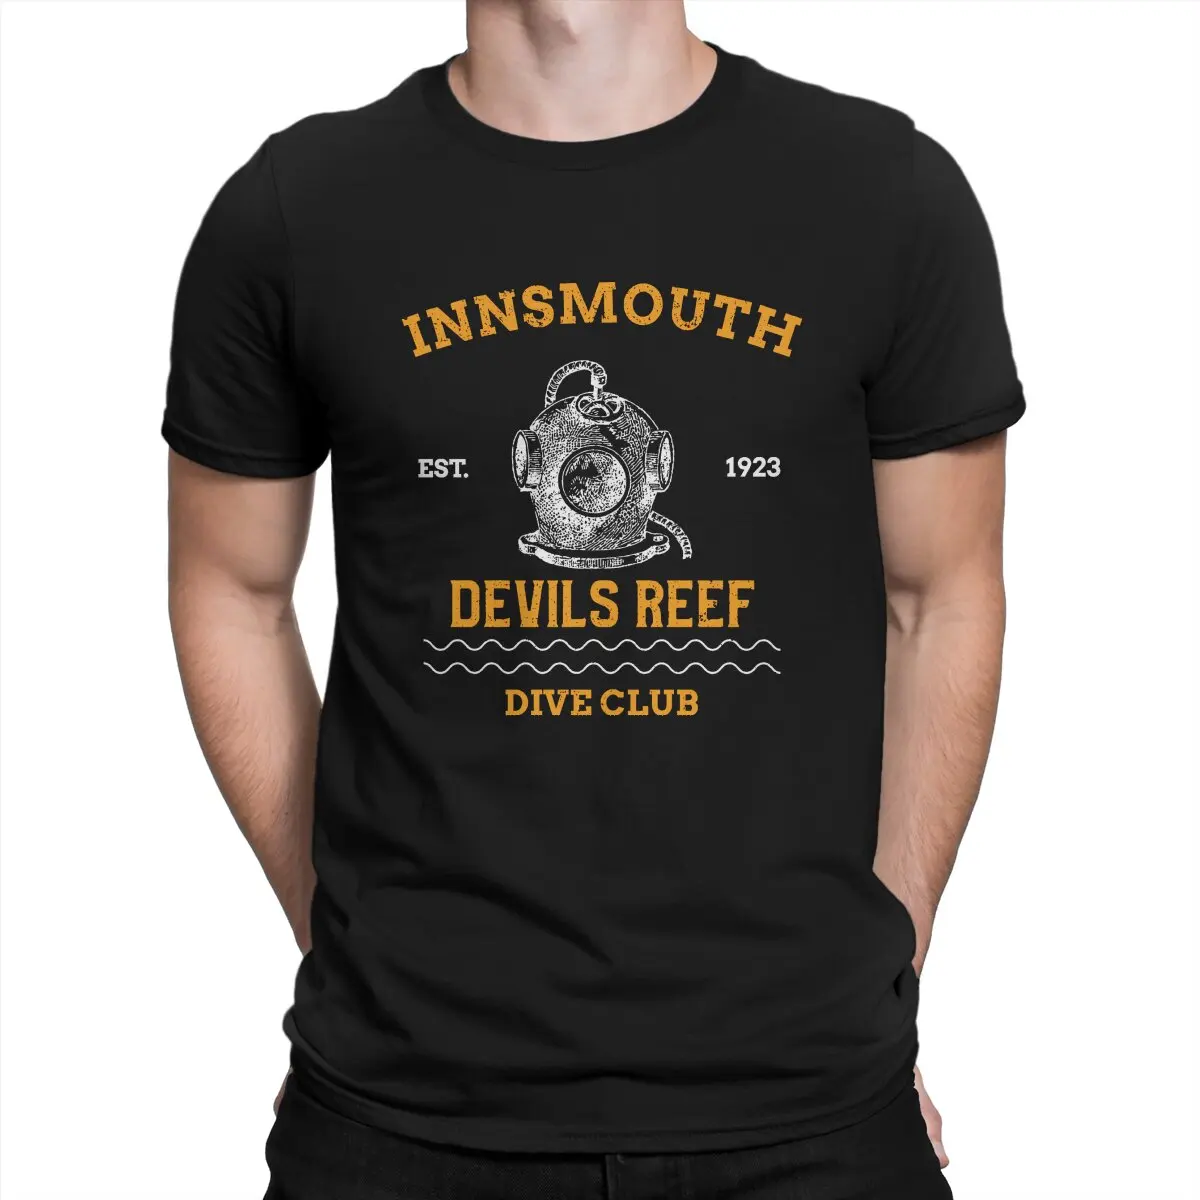 

Dive Scuba Diving Creative TShirt for Men Innsmouth Devil Reef Dive Club Round Collar Basic T Shirt Personalize Gift Clothes